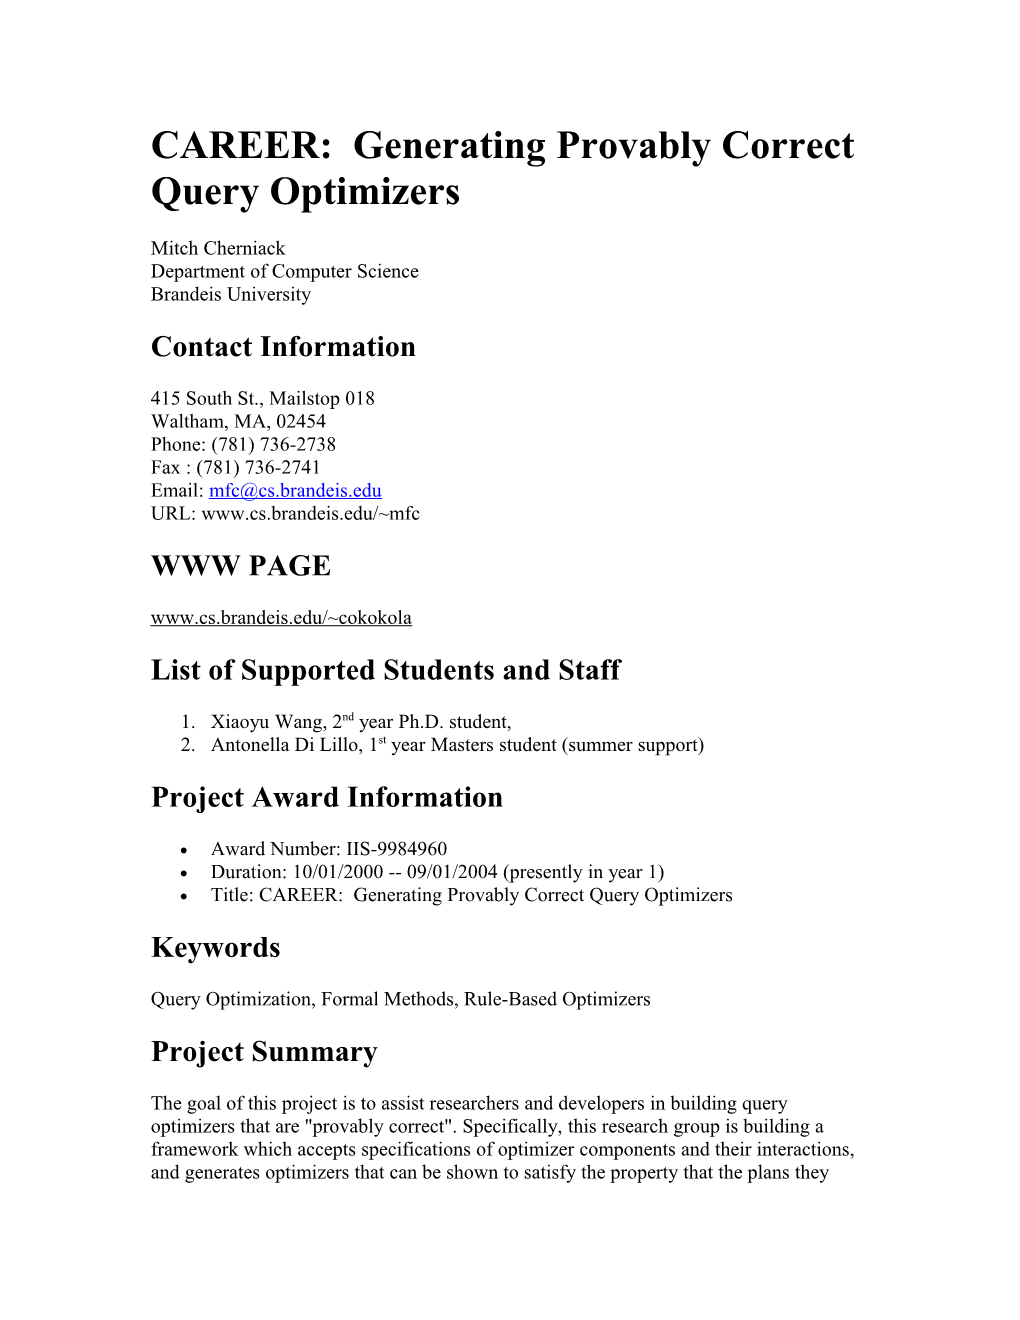 CAREER: Generating Provably Correct Query Optimizers